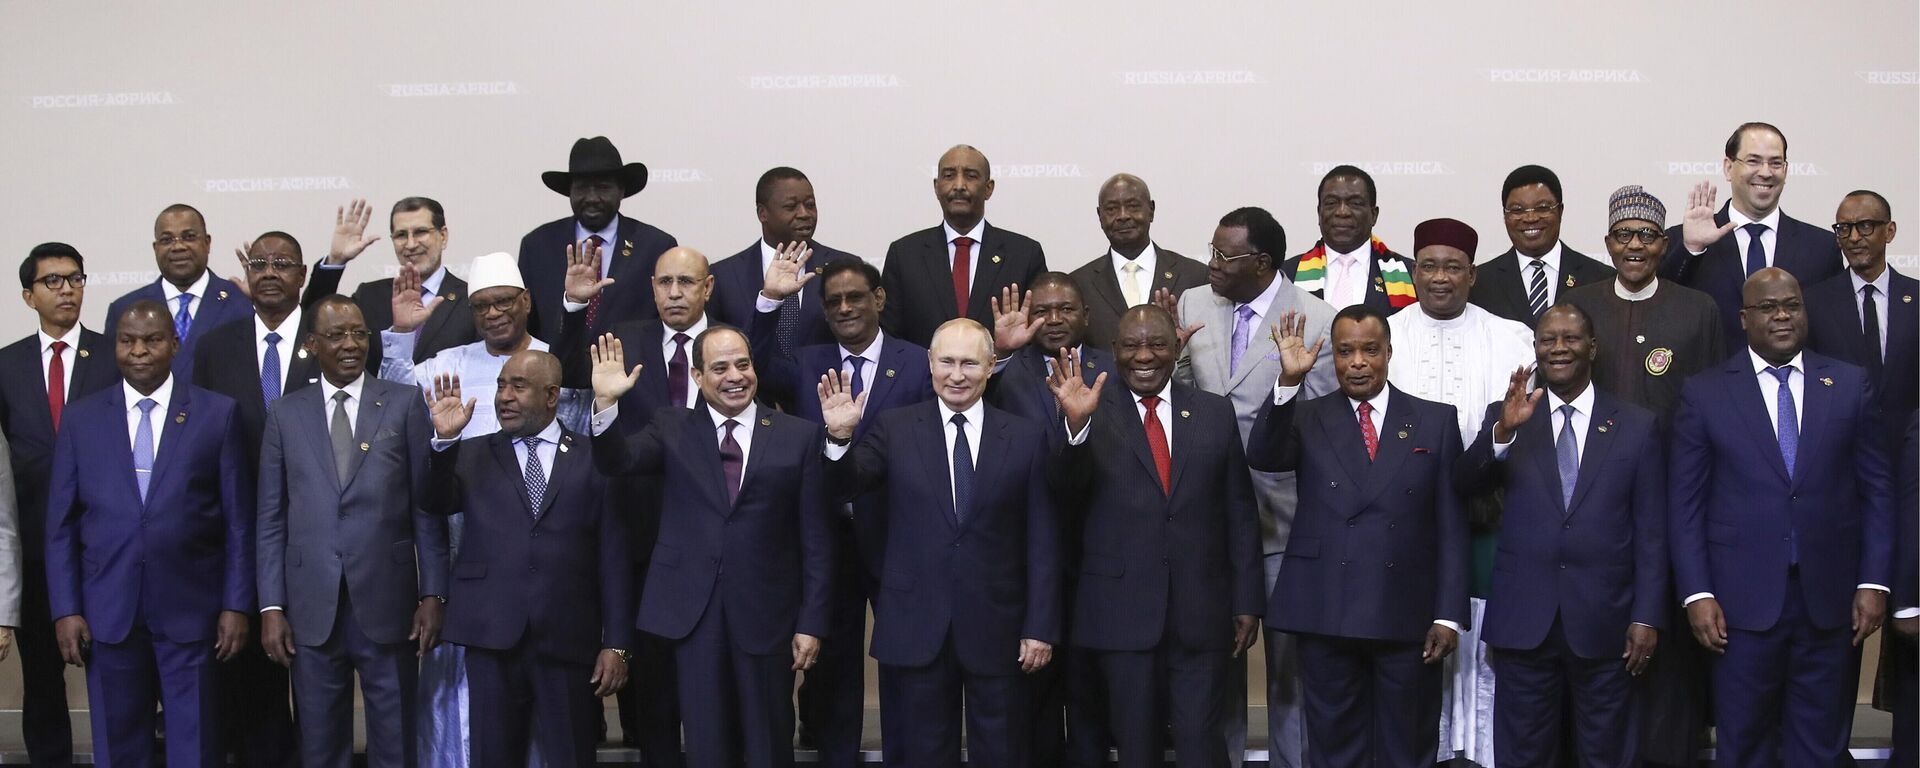 Russian President Vladimir Putin, center, poses for a photo with leaders of African countries at the Russia-Africa summit in the Black Sea resort of Sochi, Russia, Thursday, Oct. 24, 2019.  - Sputnik International, 1920, 26.01.2023